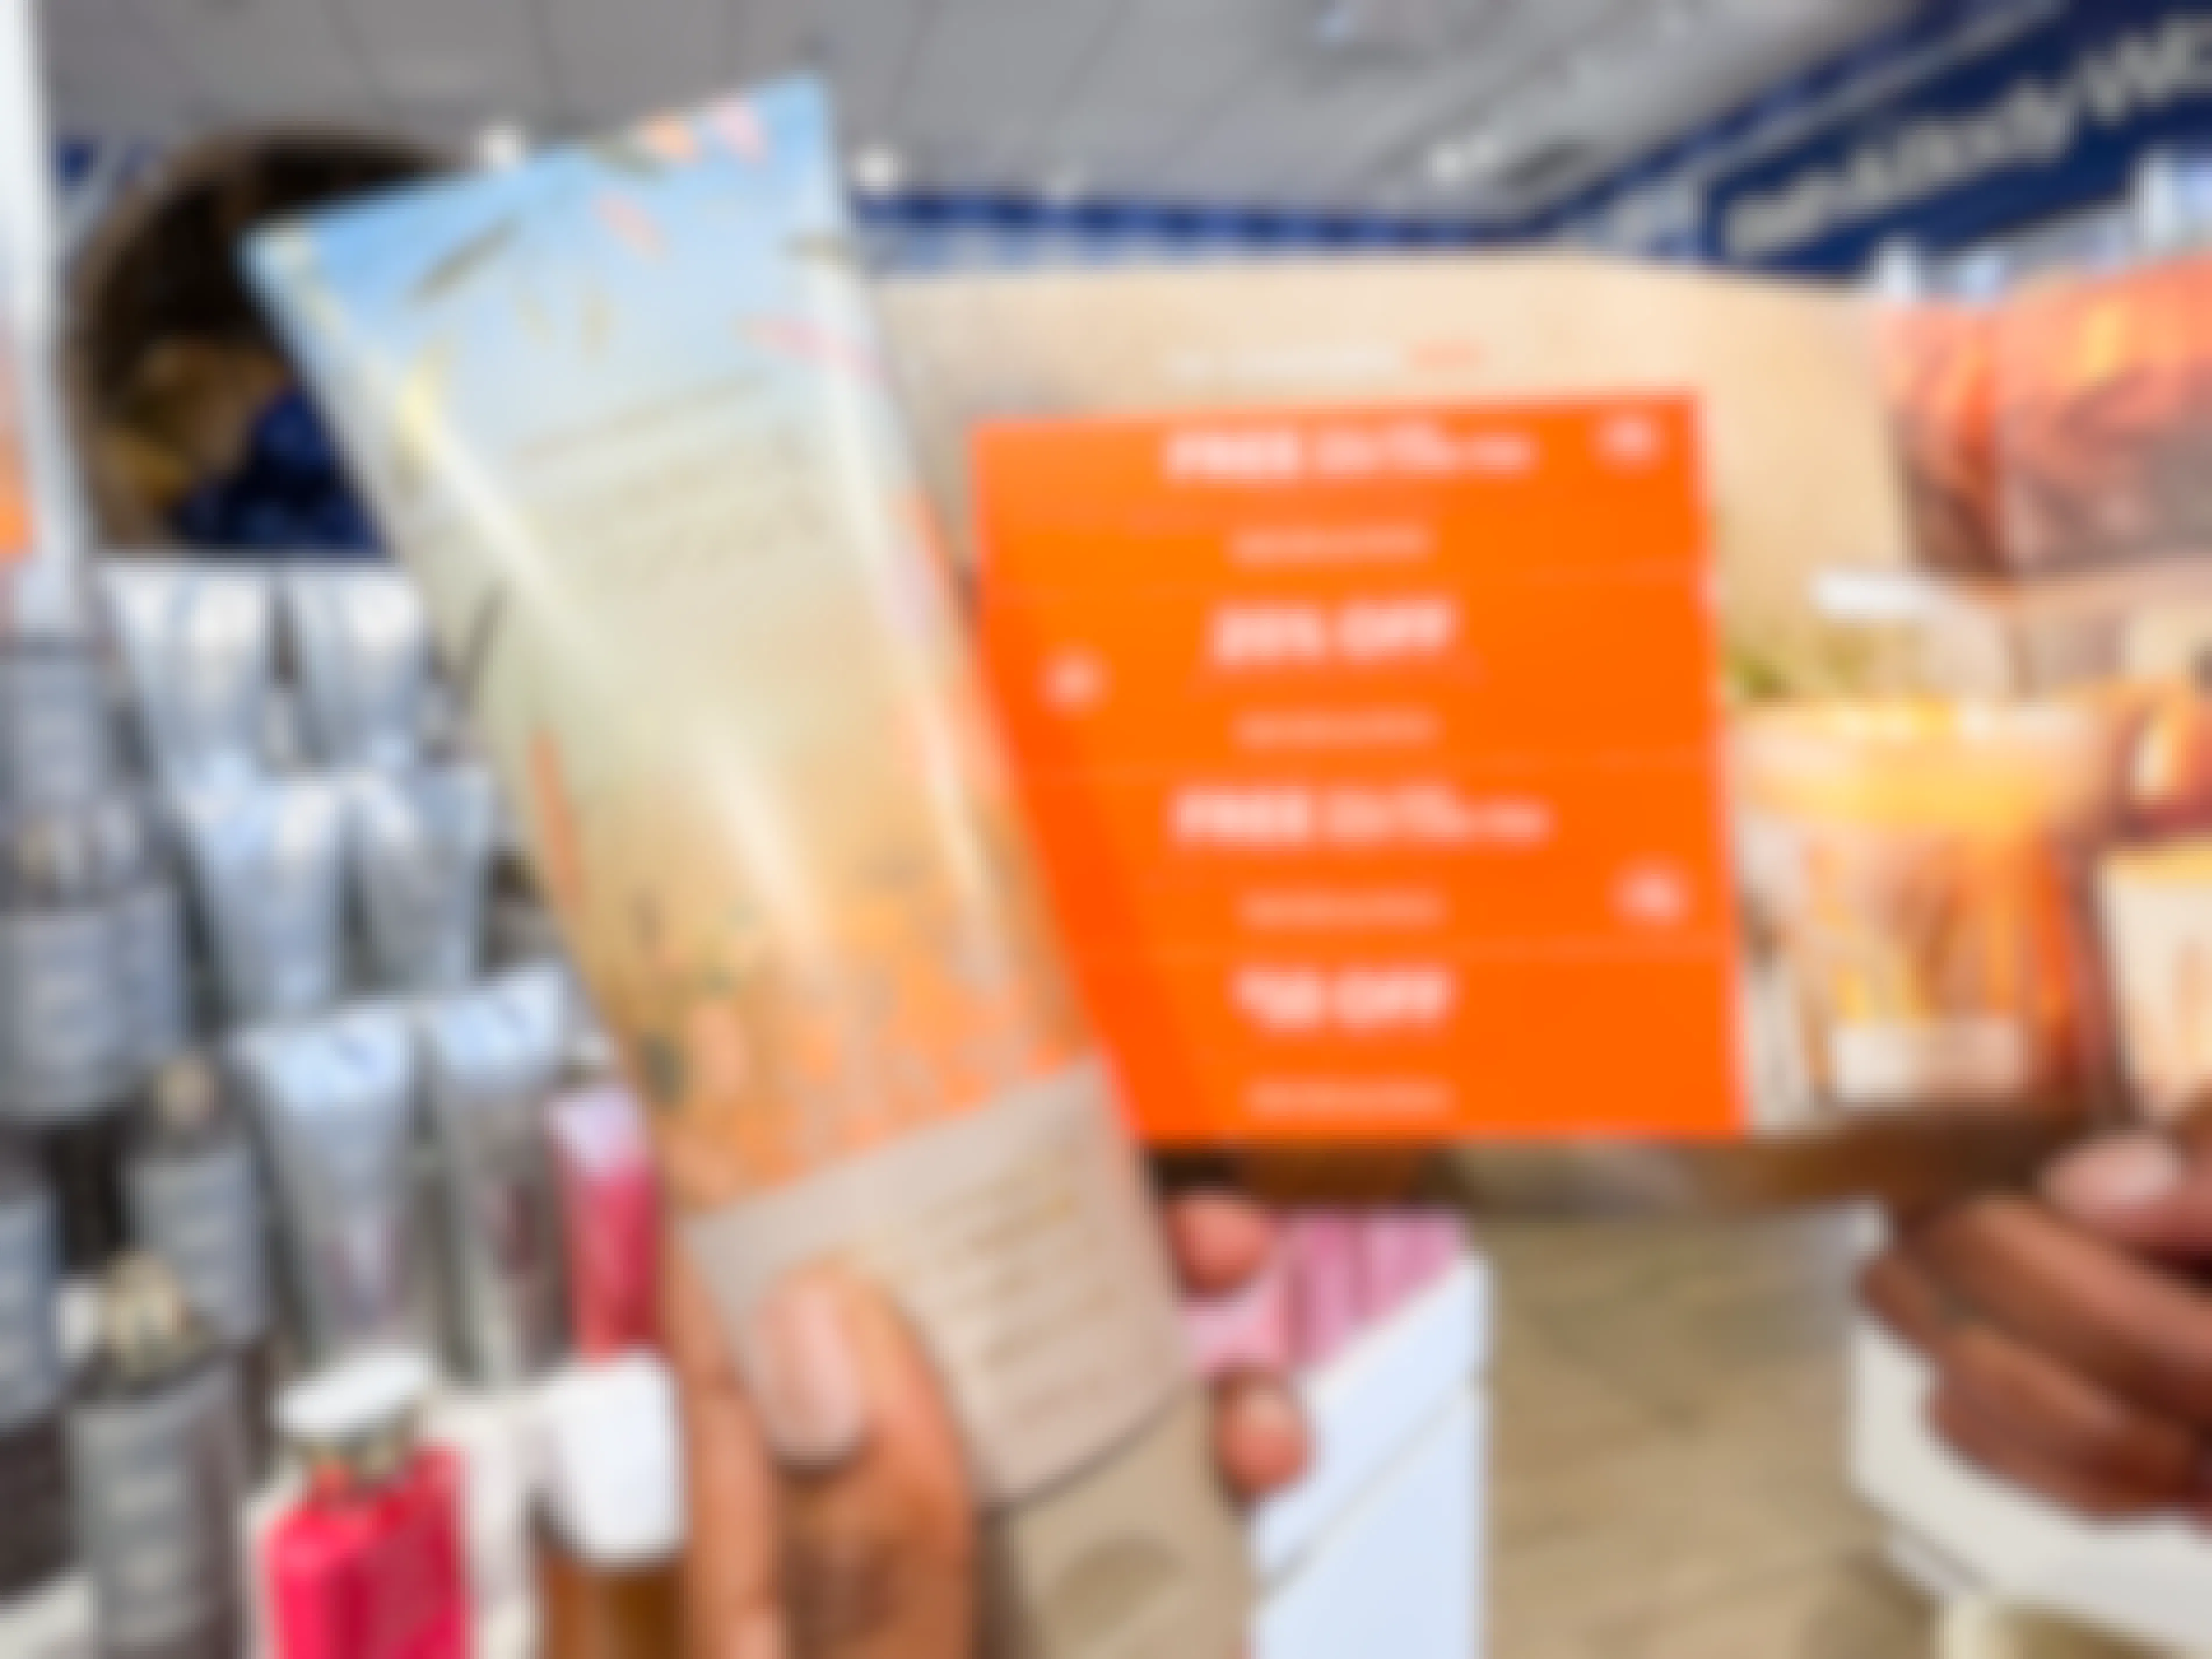 A person's hands holding a bottle of lotion and a card of coupons inside Bath & Body Works.